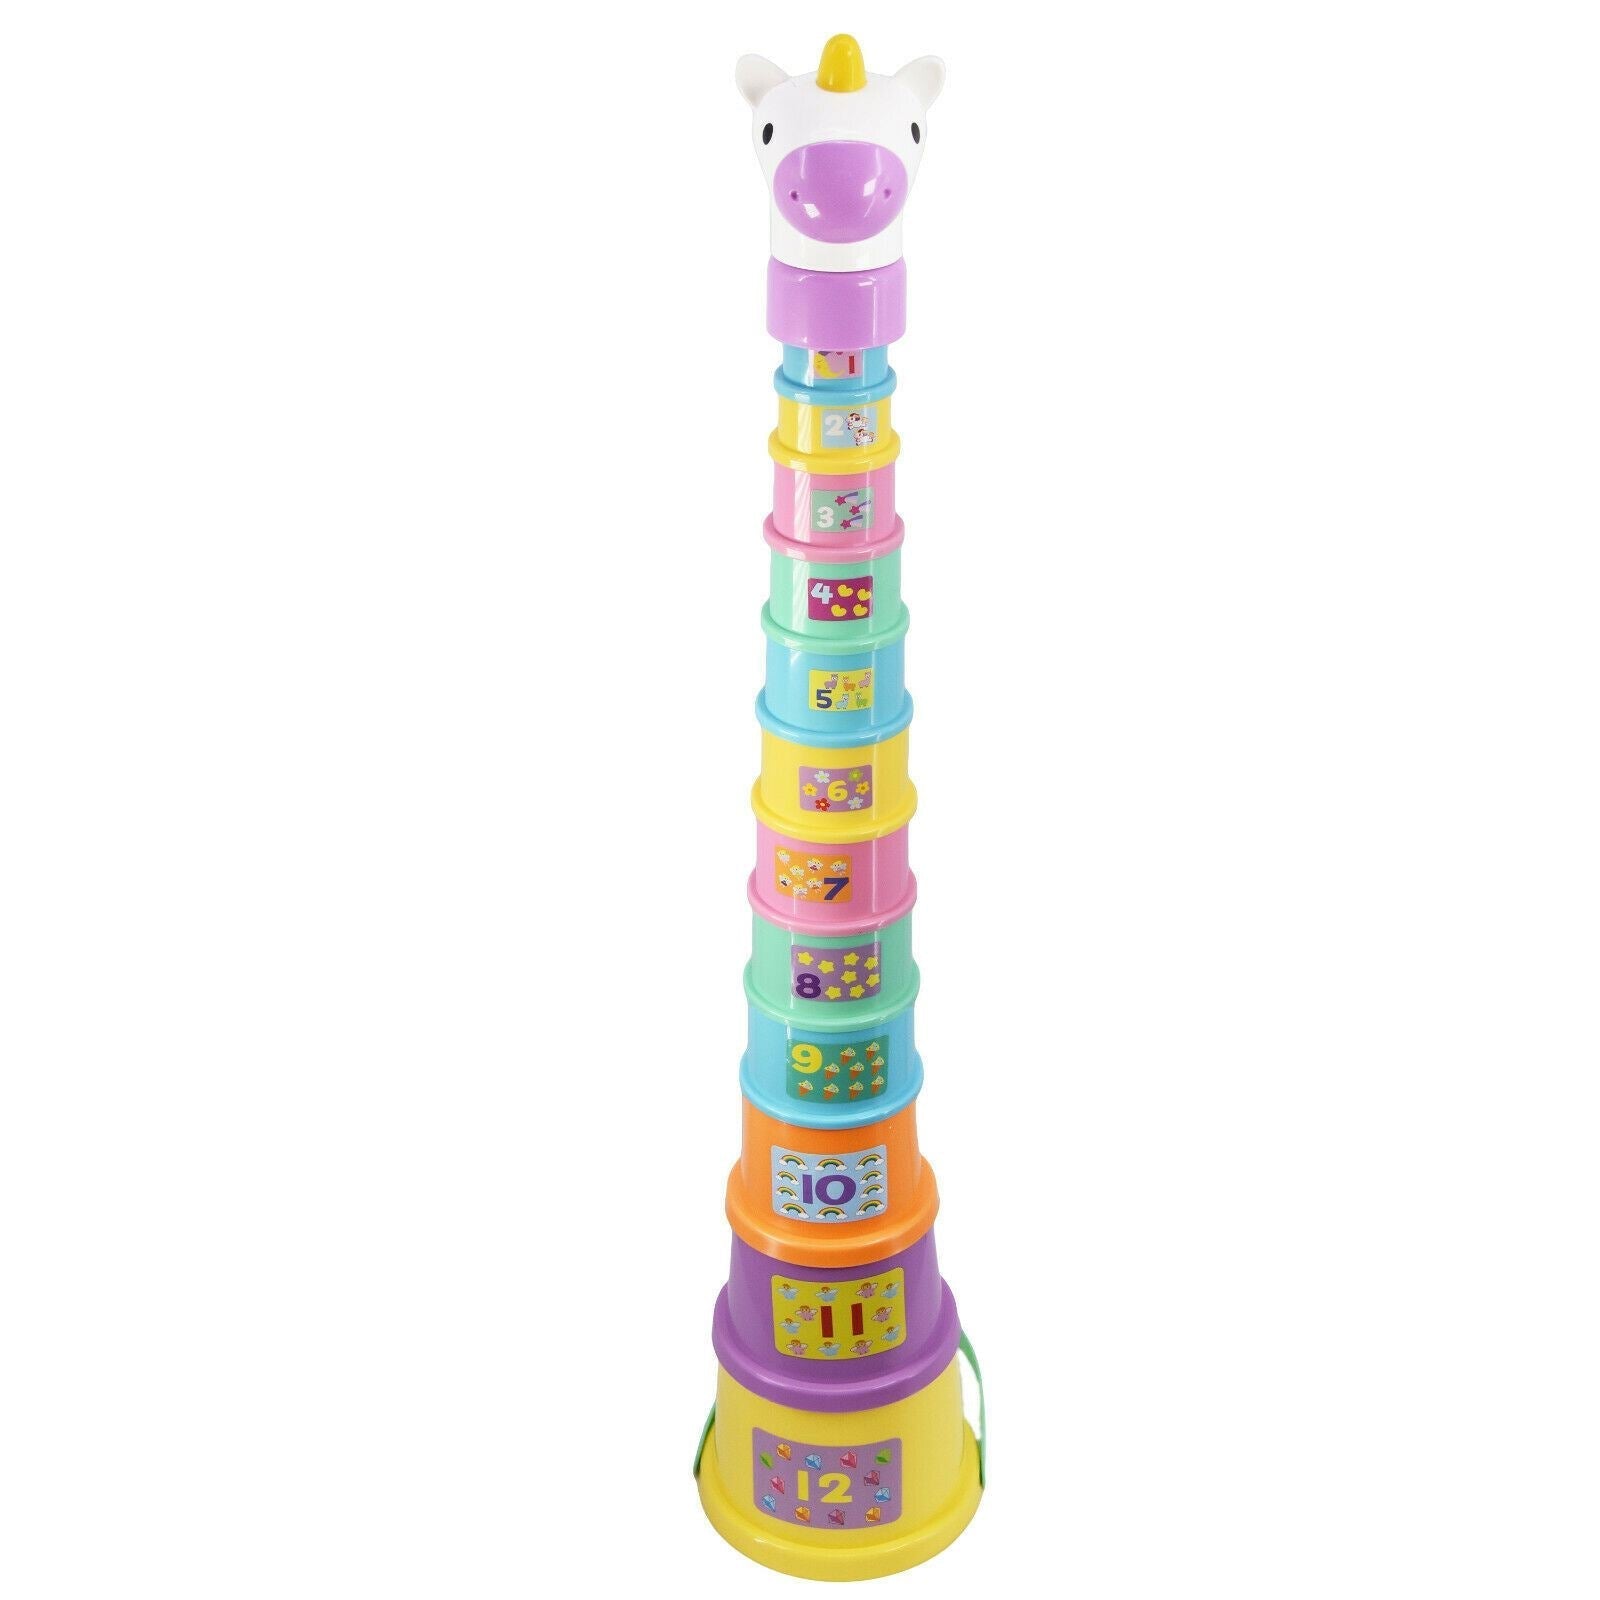 The Magic Toy Shop Stacking Cups Unicorn Stacking Nesting Cup Block